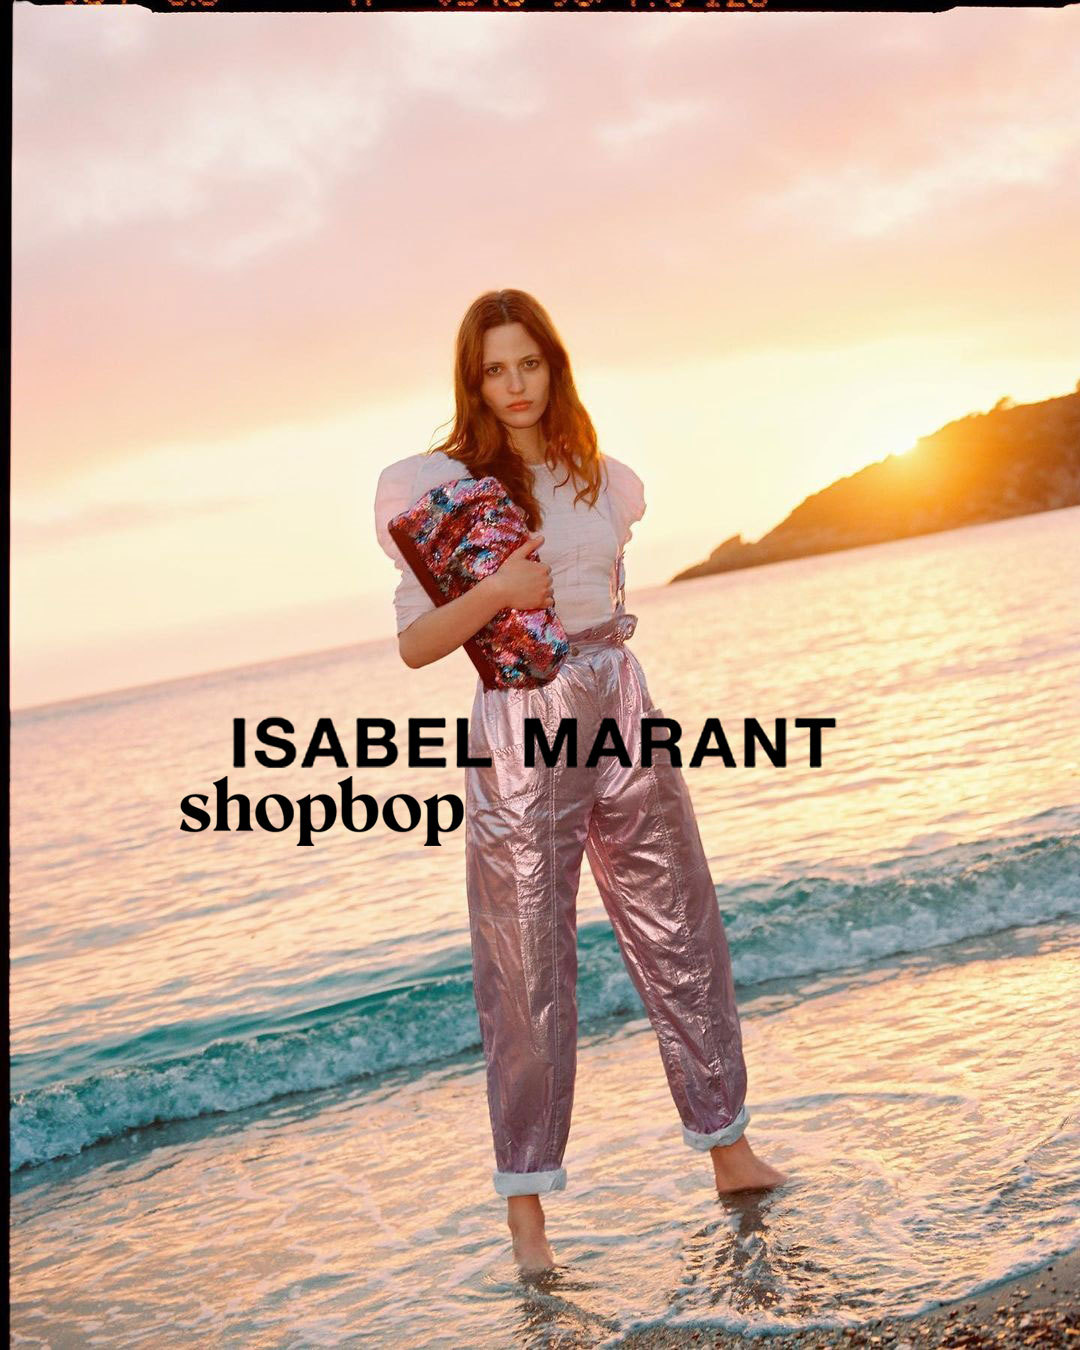 Julia for ISABEL MARANT x New Arrivals by Pablo Curto